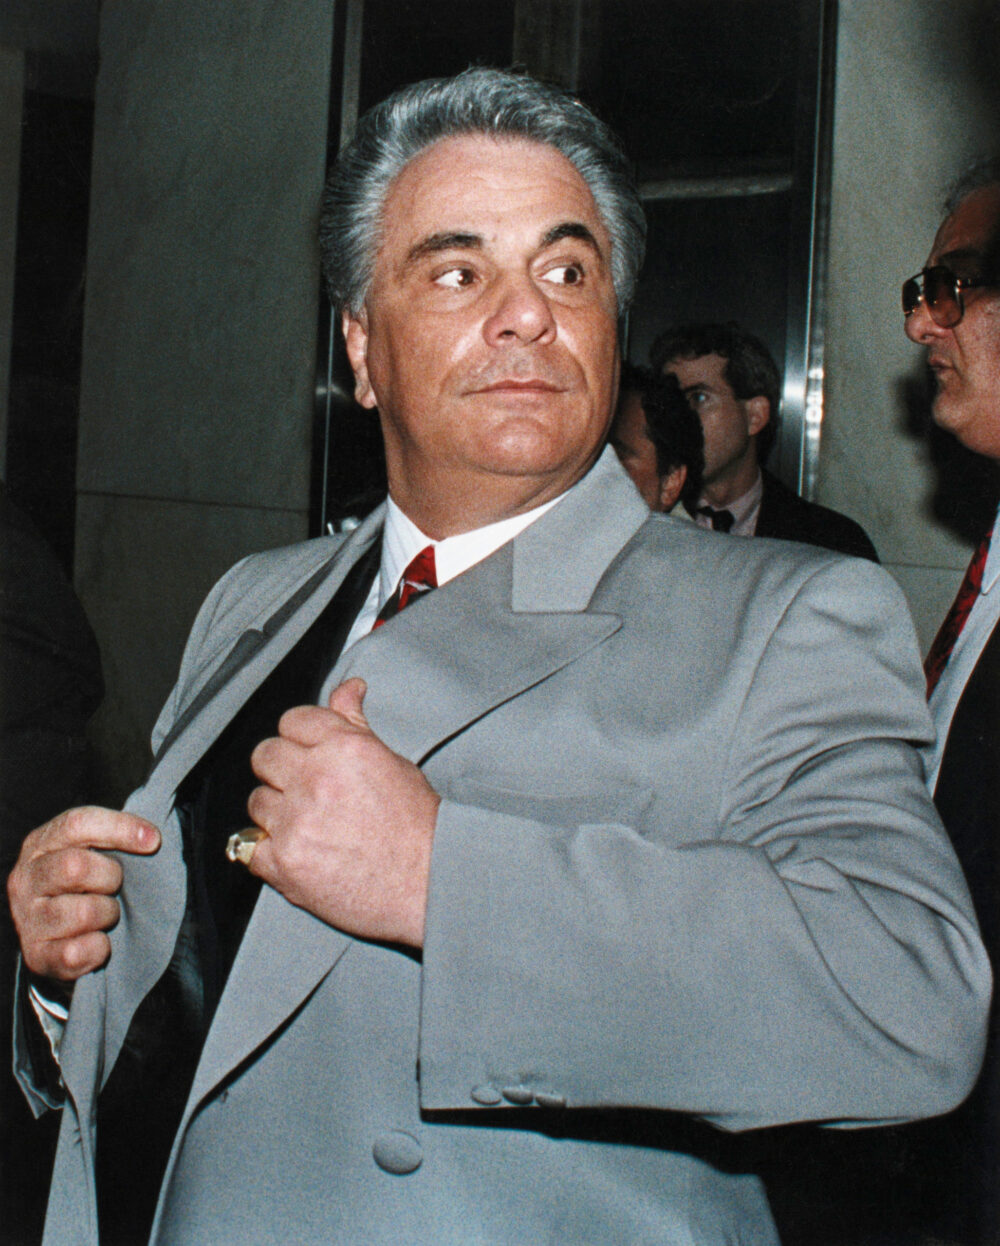 Gotti family tree: From John Gotti and Peter to Victoria and